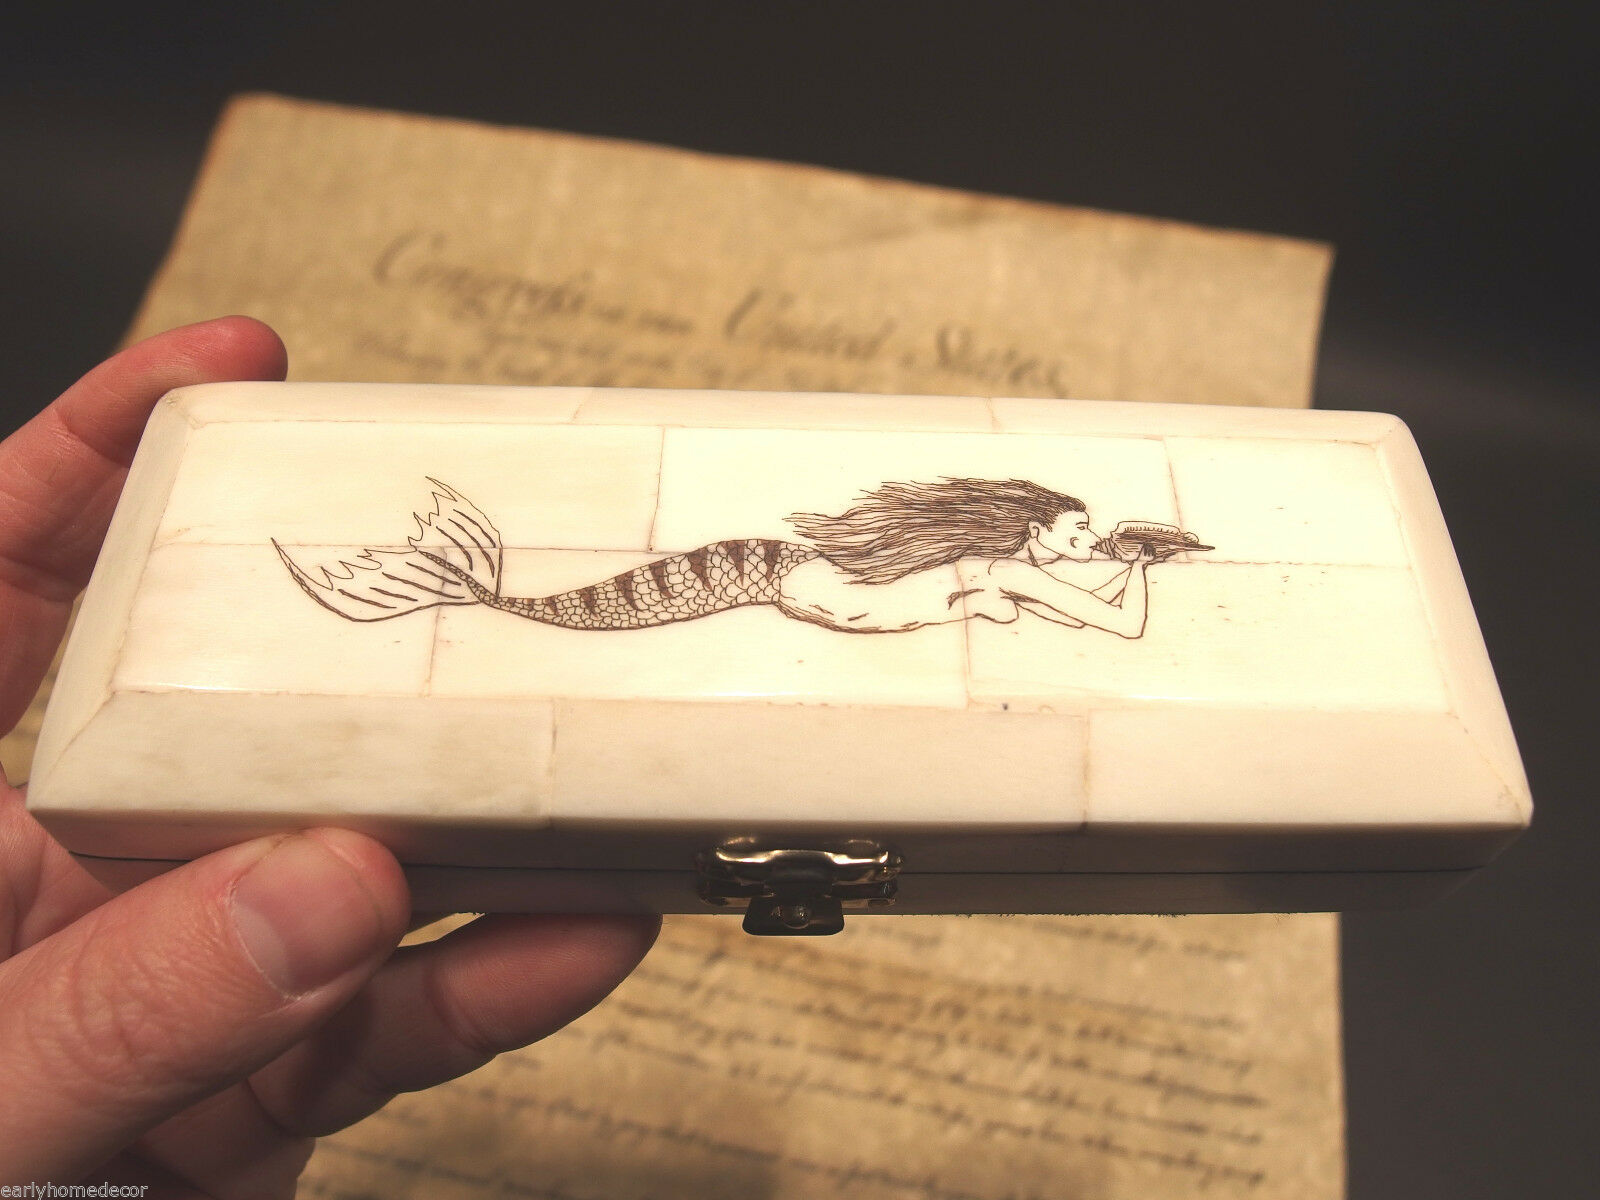 Antique Style Mermaid Scrimshaw Etched Bone & Wood Trinket Stamp Jewelry Box - Early Home Decor